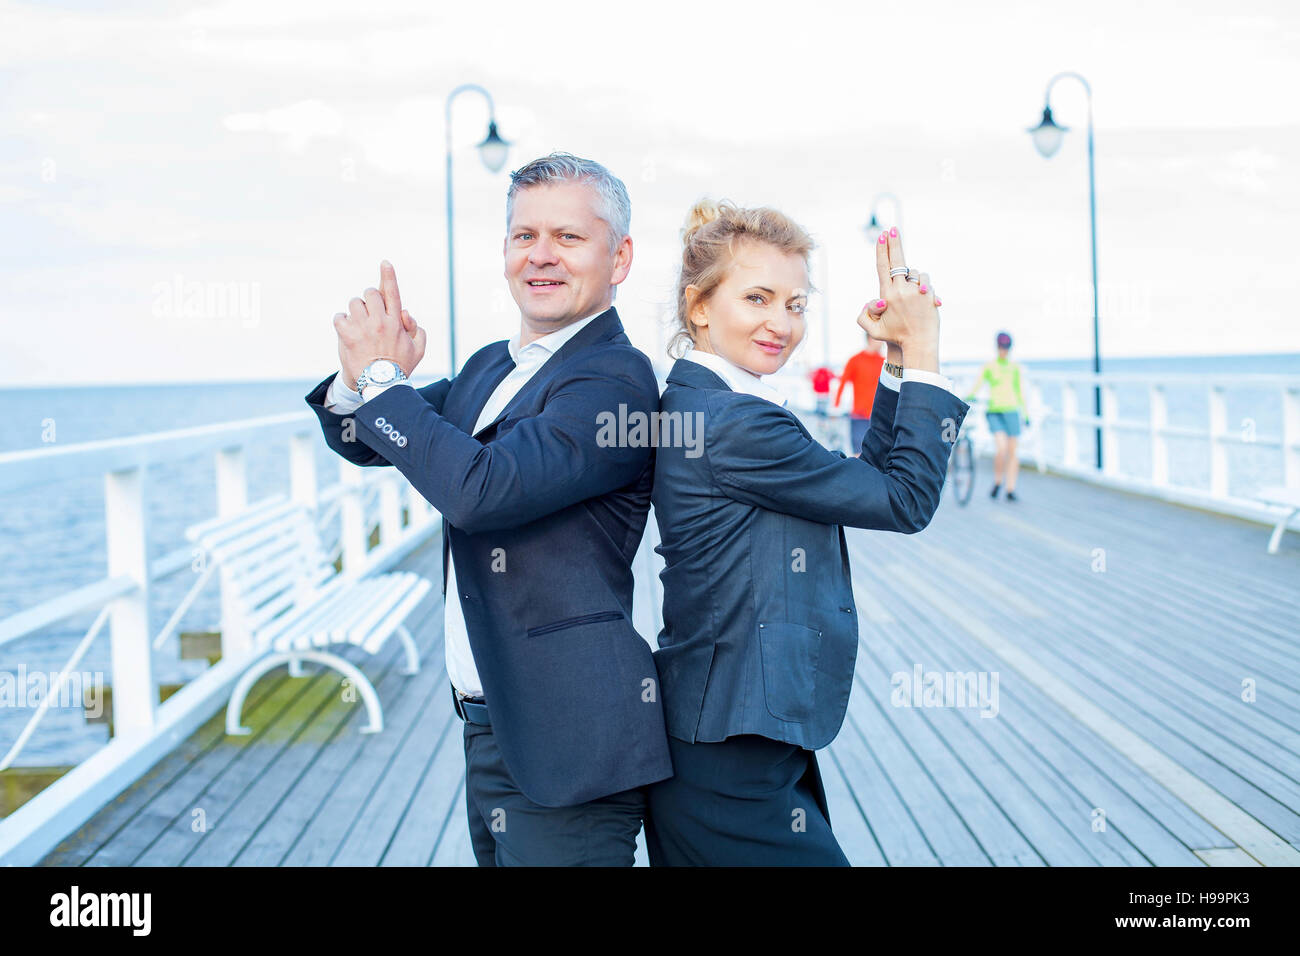 Two business people making finger gun gesture Stock Photo